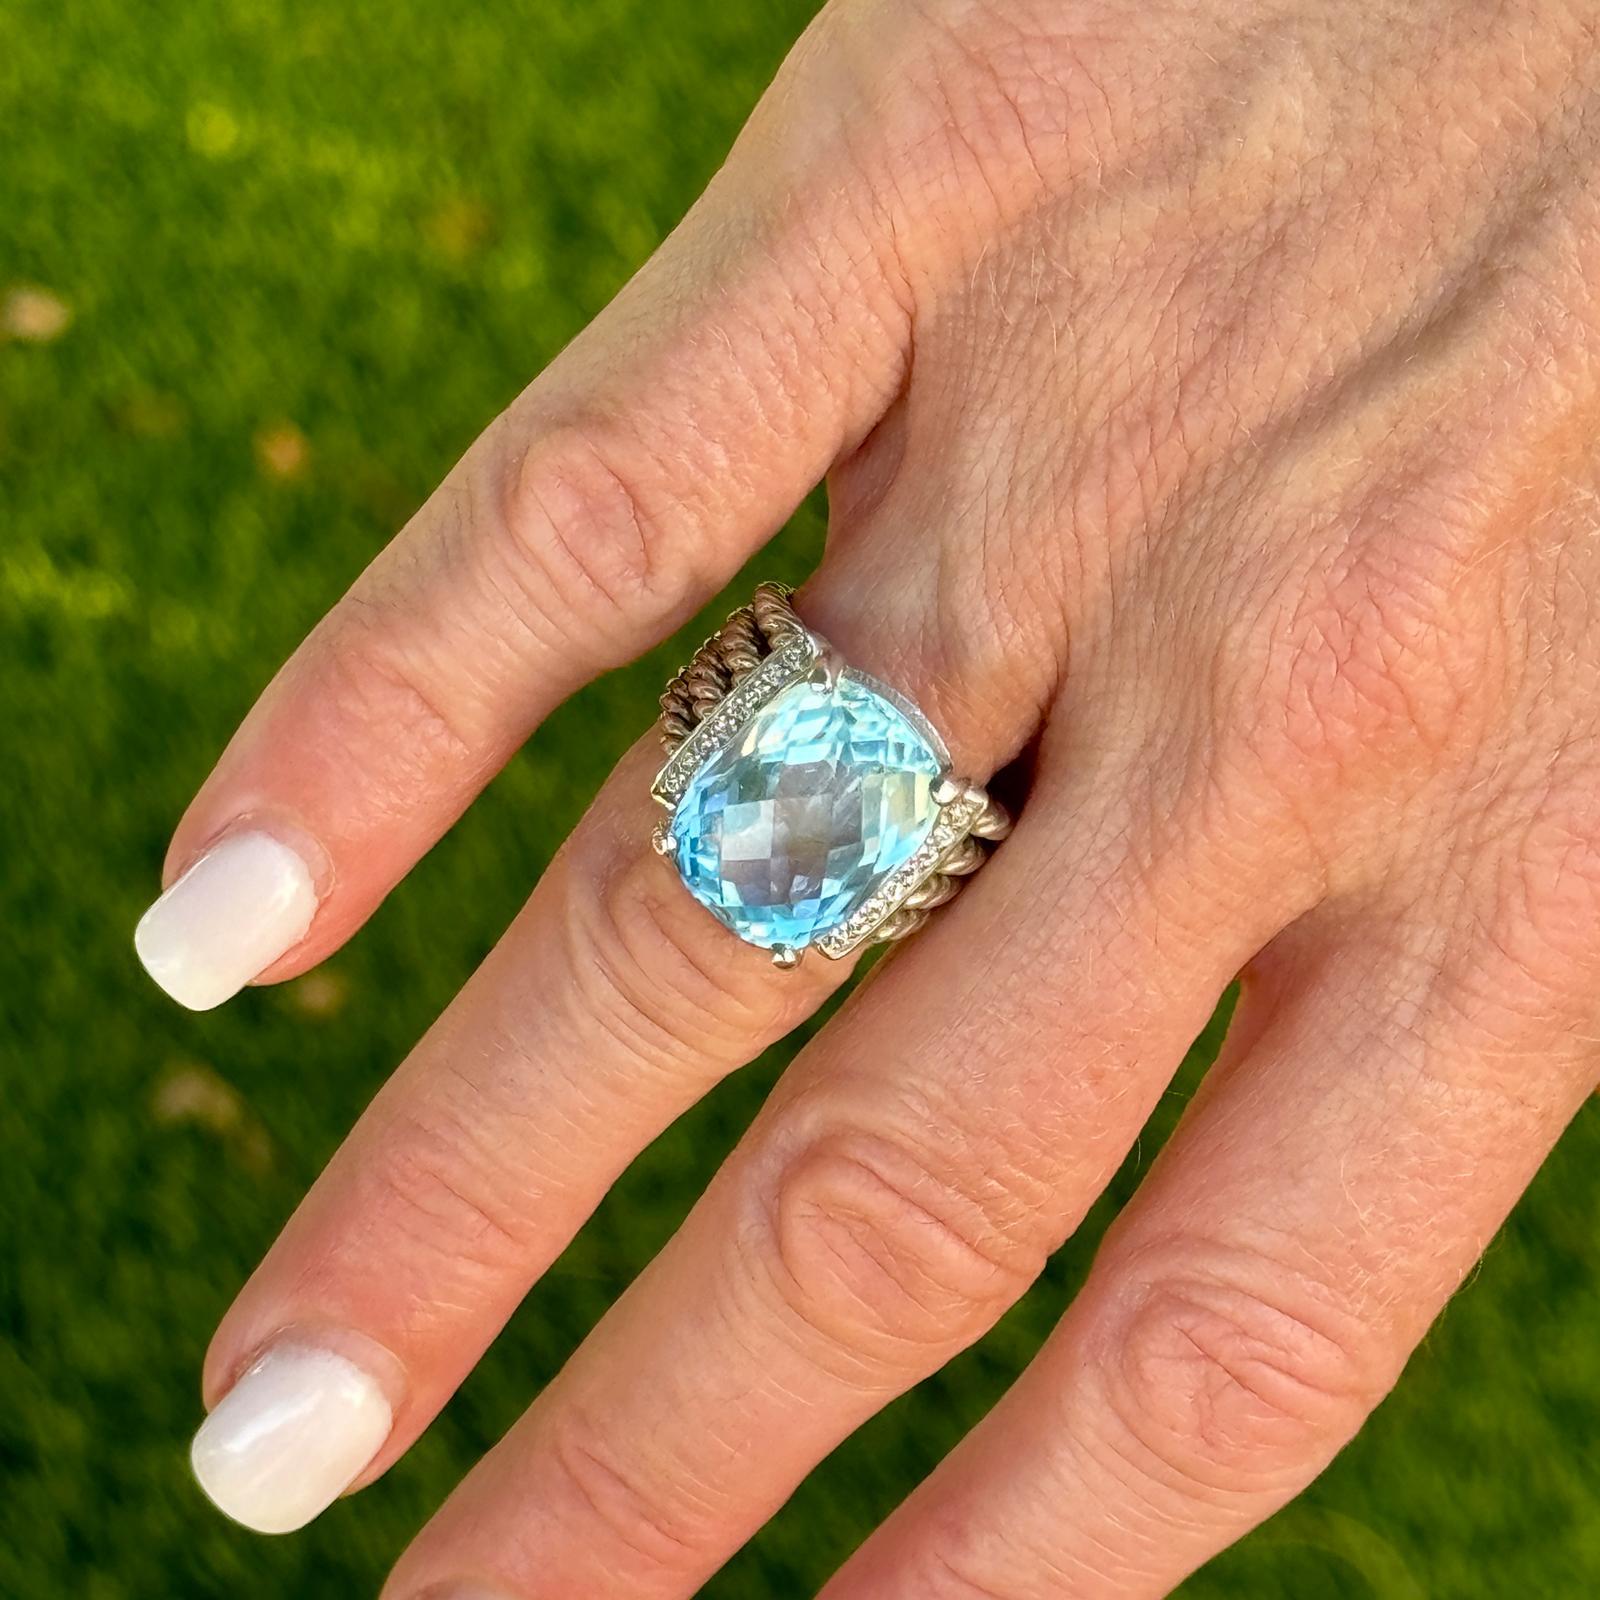 David Yurman Wheaton blue topaz and diamond ring fashioned in sterling silver. The ring features a faceted cushion cut blue topaz gemstone and round brilliant cut diamonds weighing approximately .13 CTW. The ring is currently size 6 (can be sized),